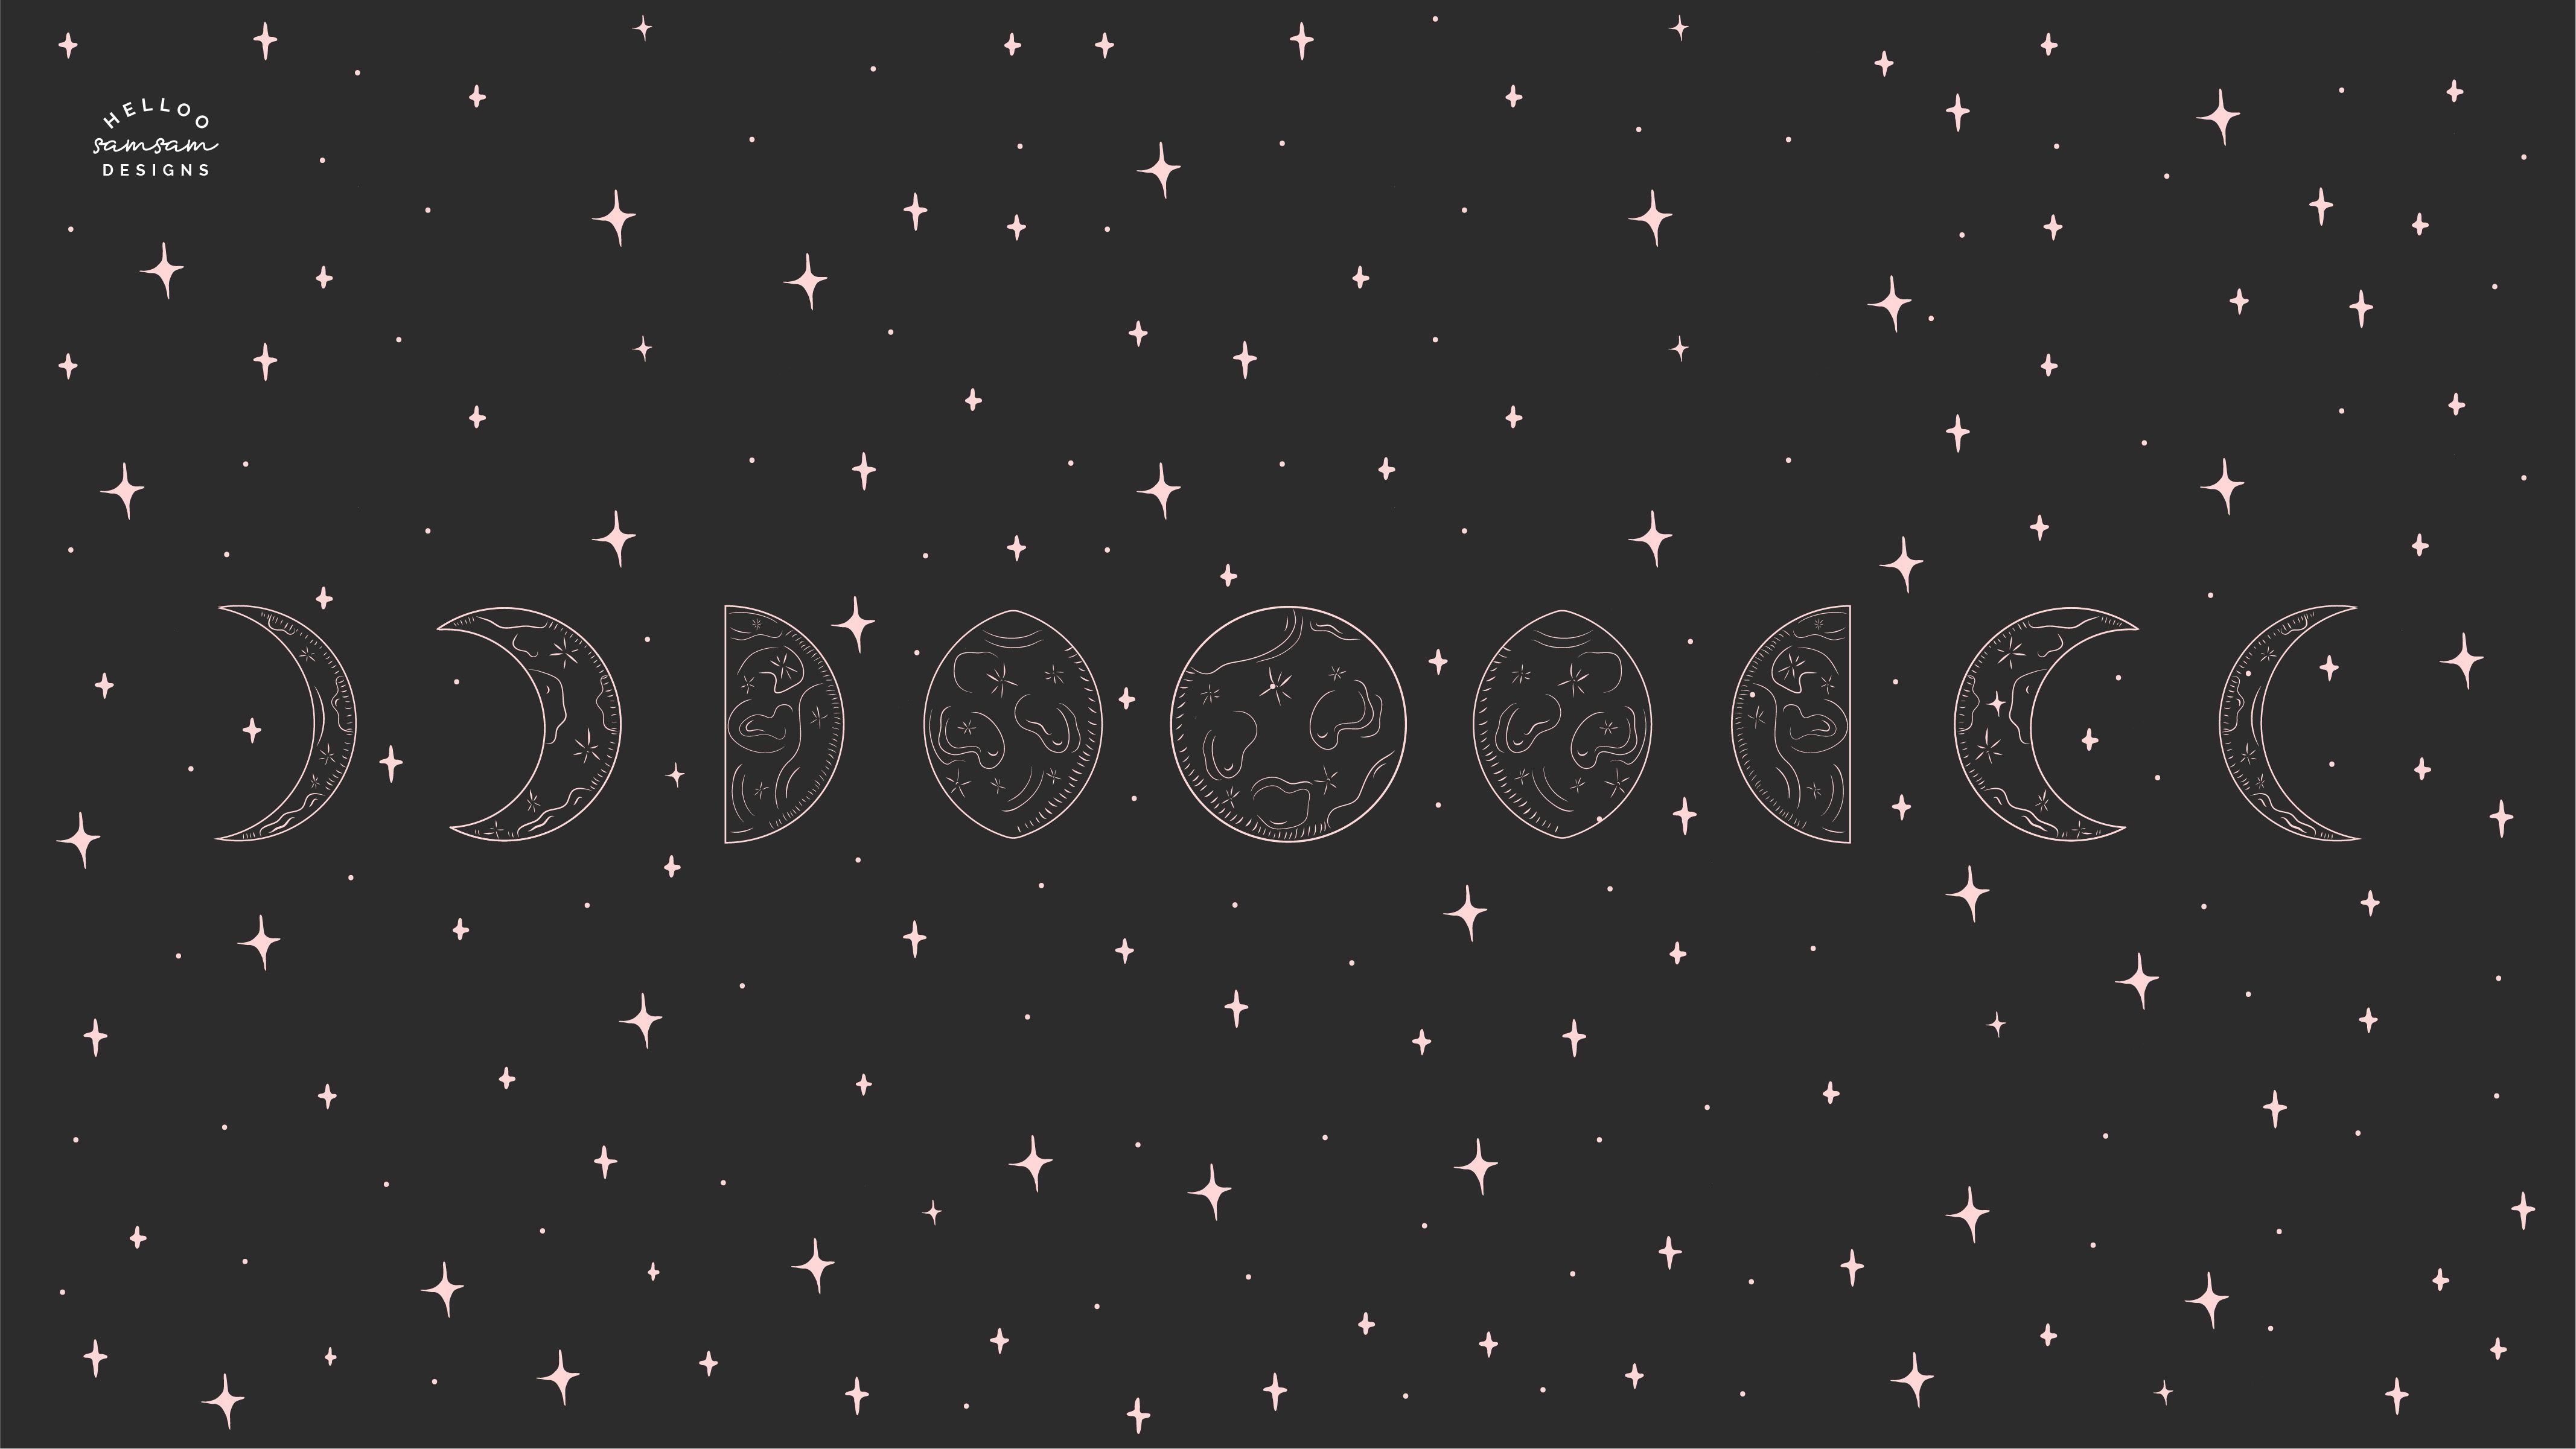 The phases of a moon in black and white - Moon phases